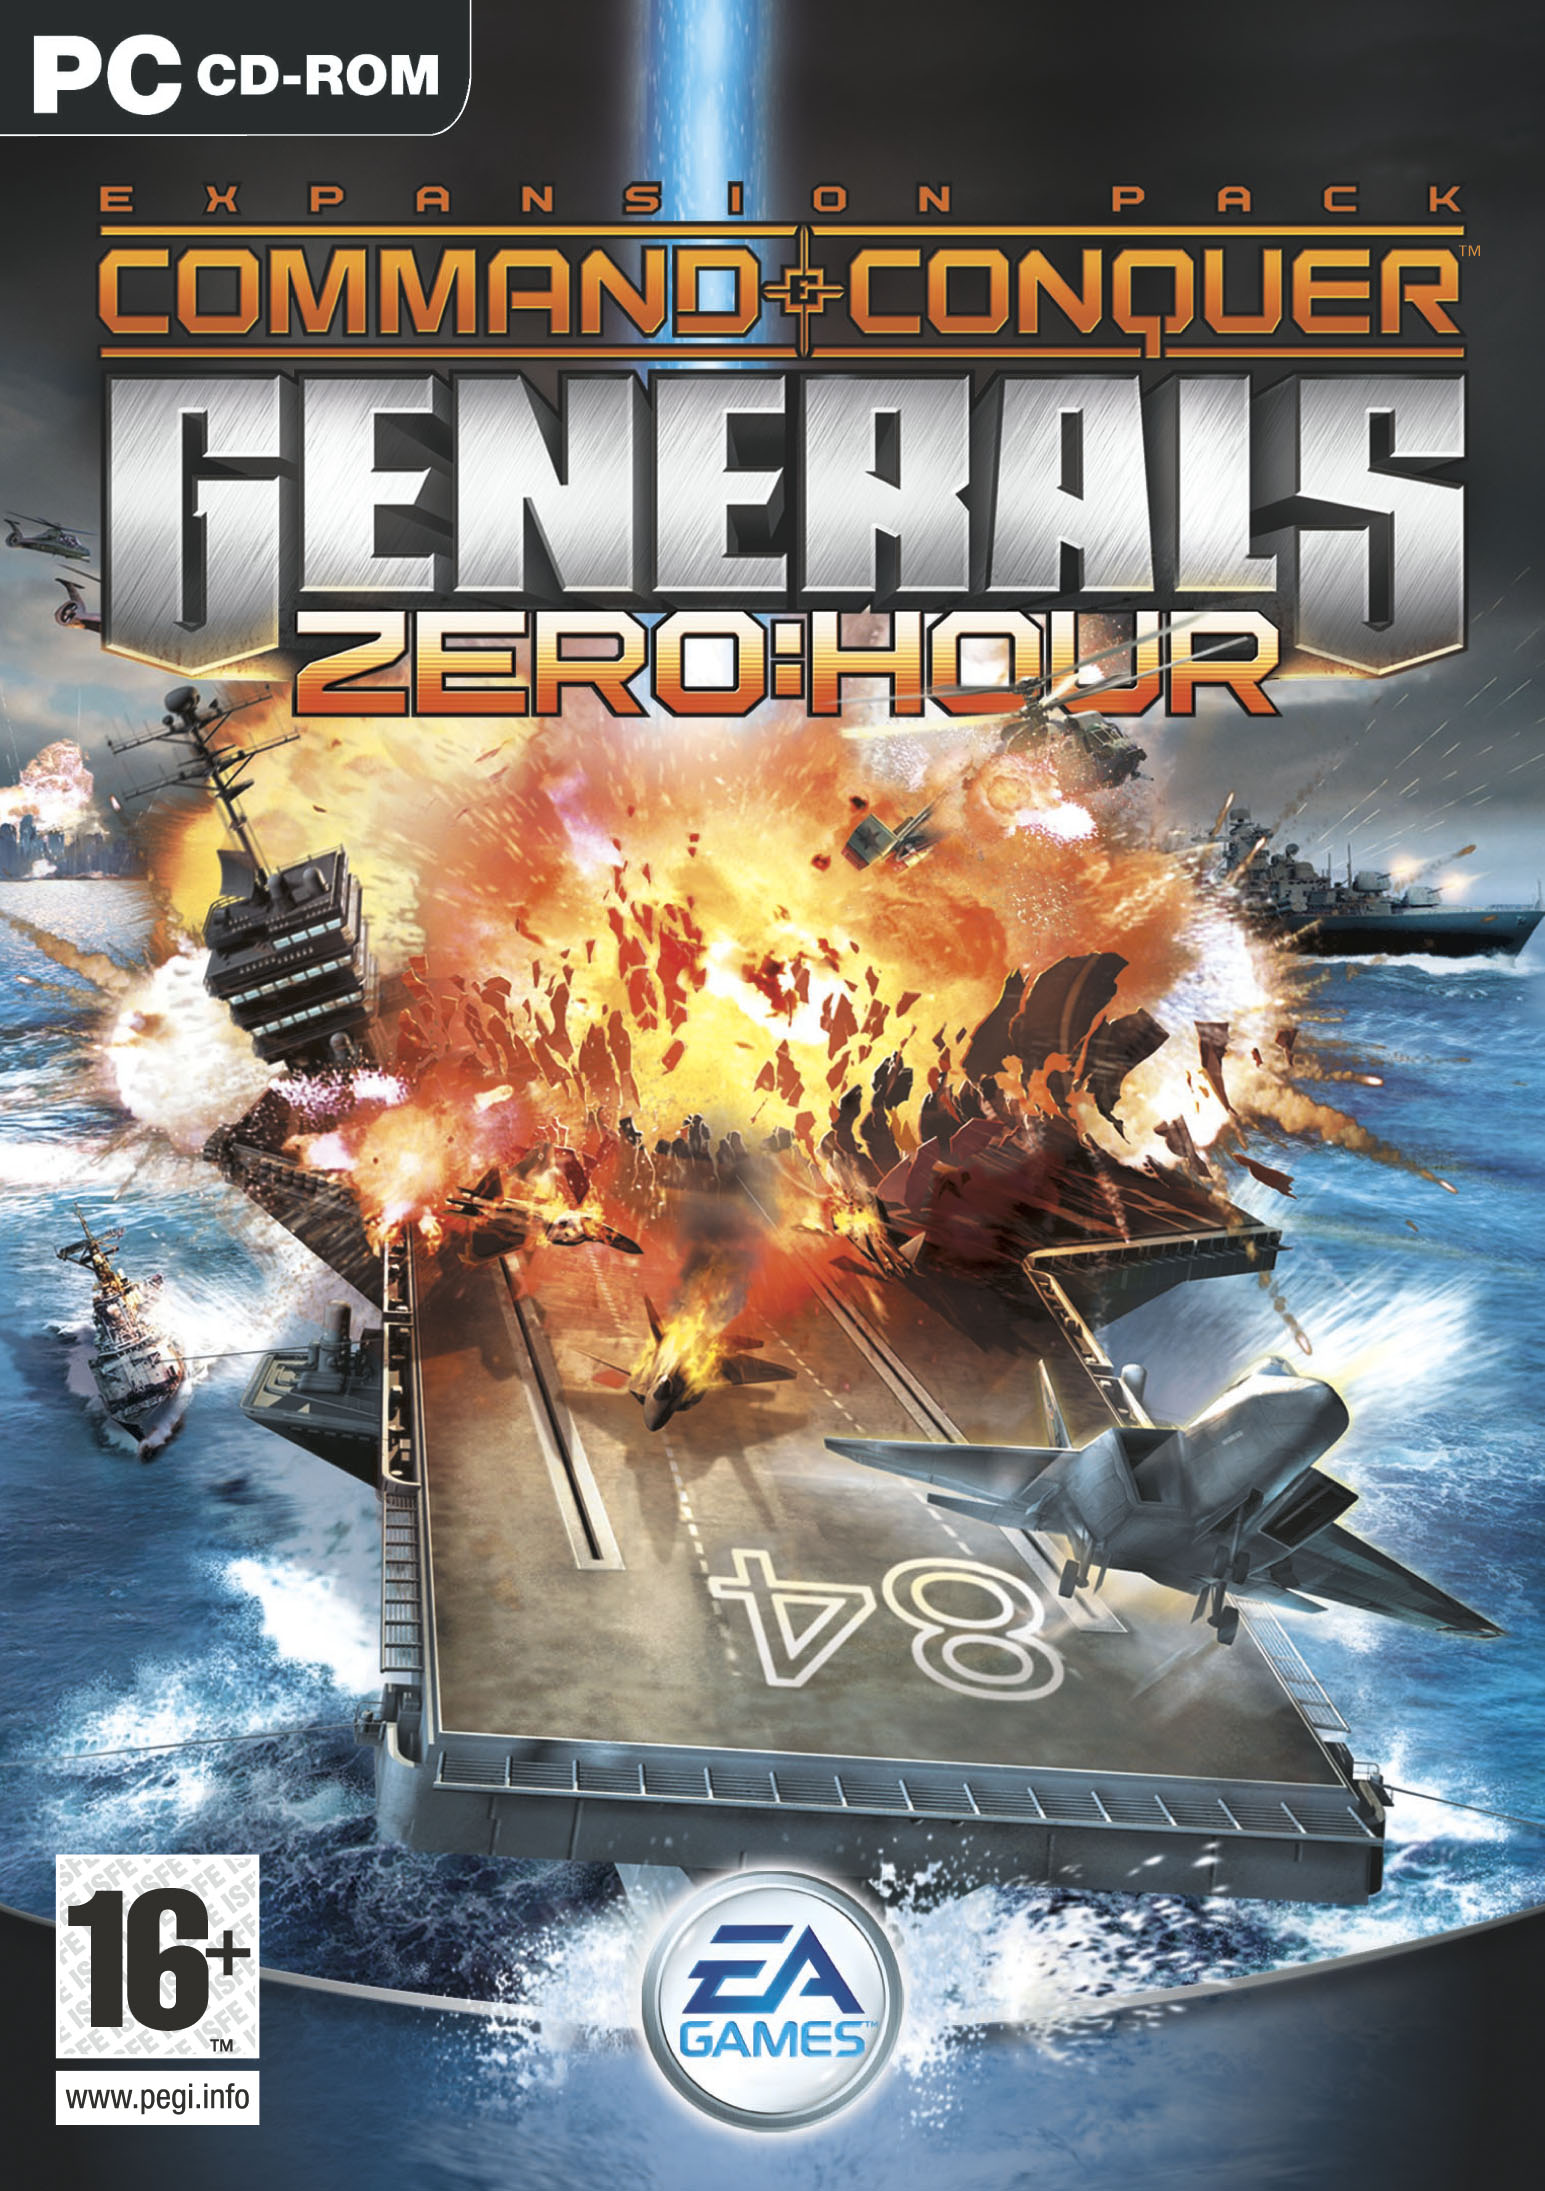 Command & Conquer: Generals - Zero Hour | Command and ...
